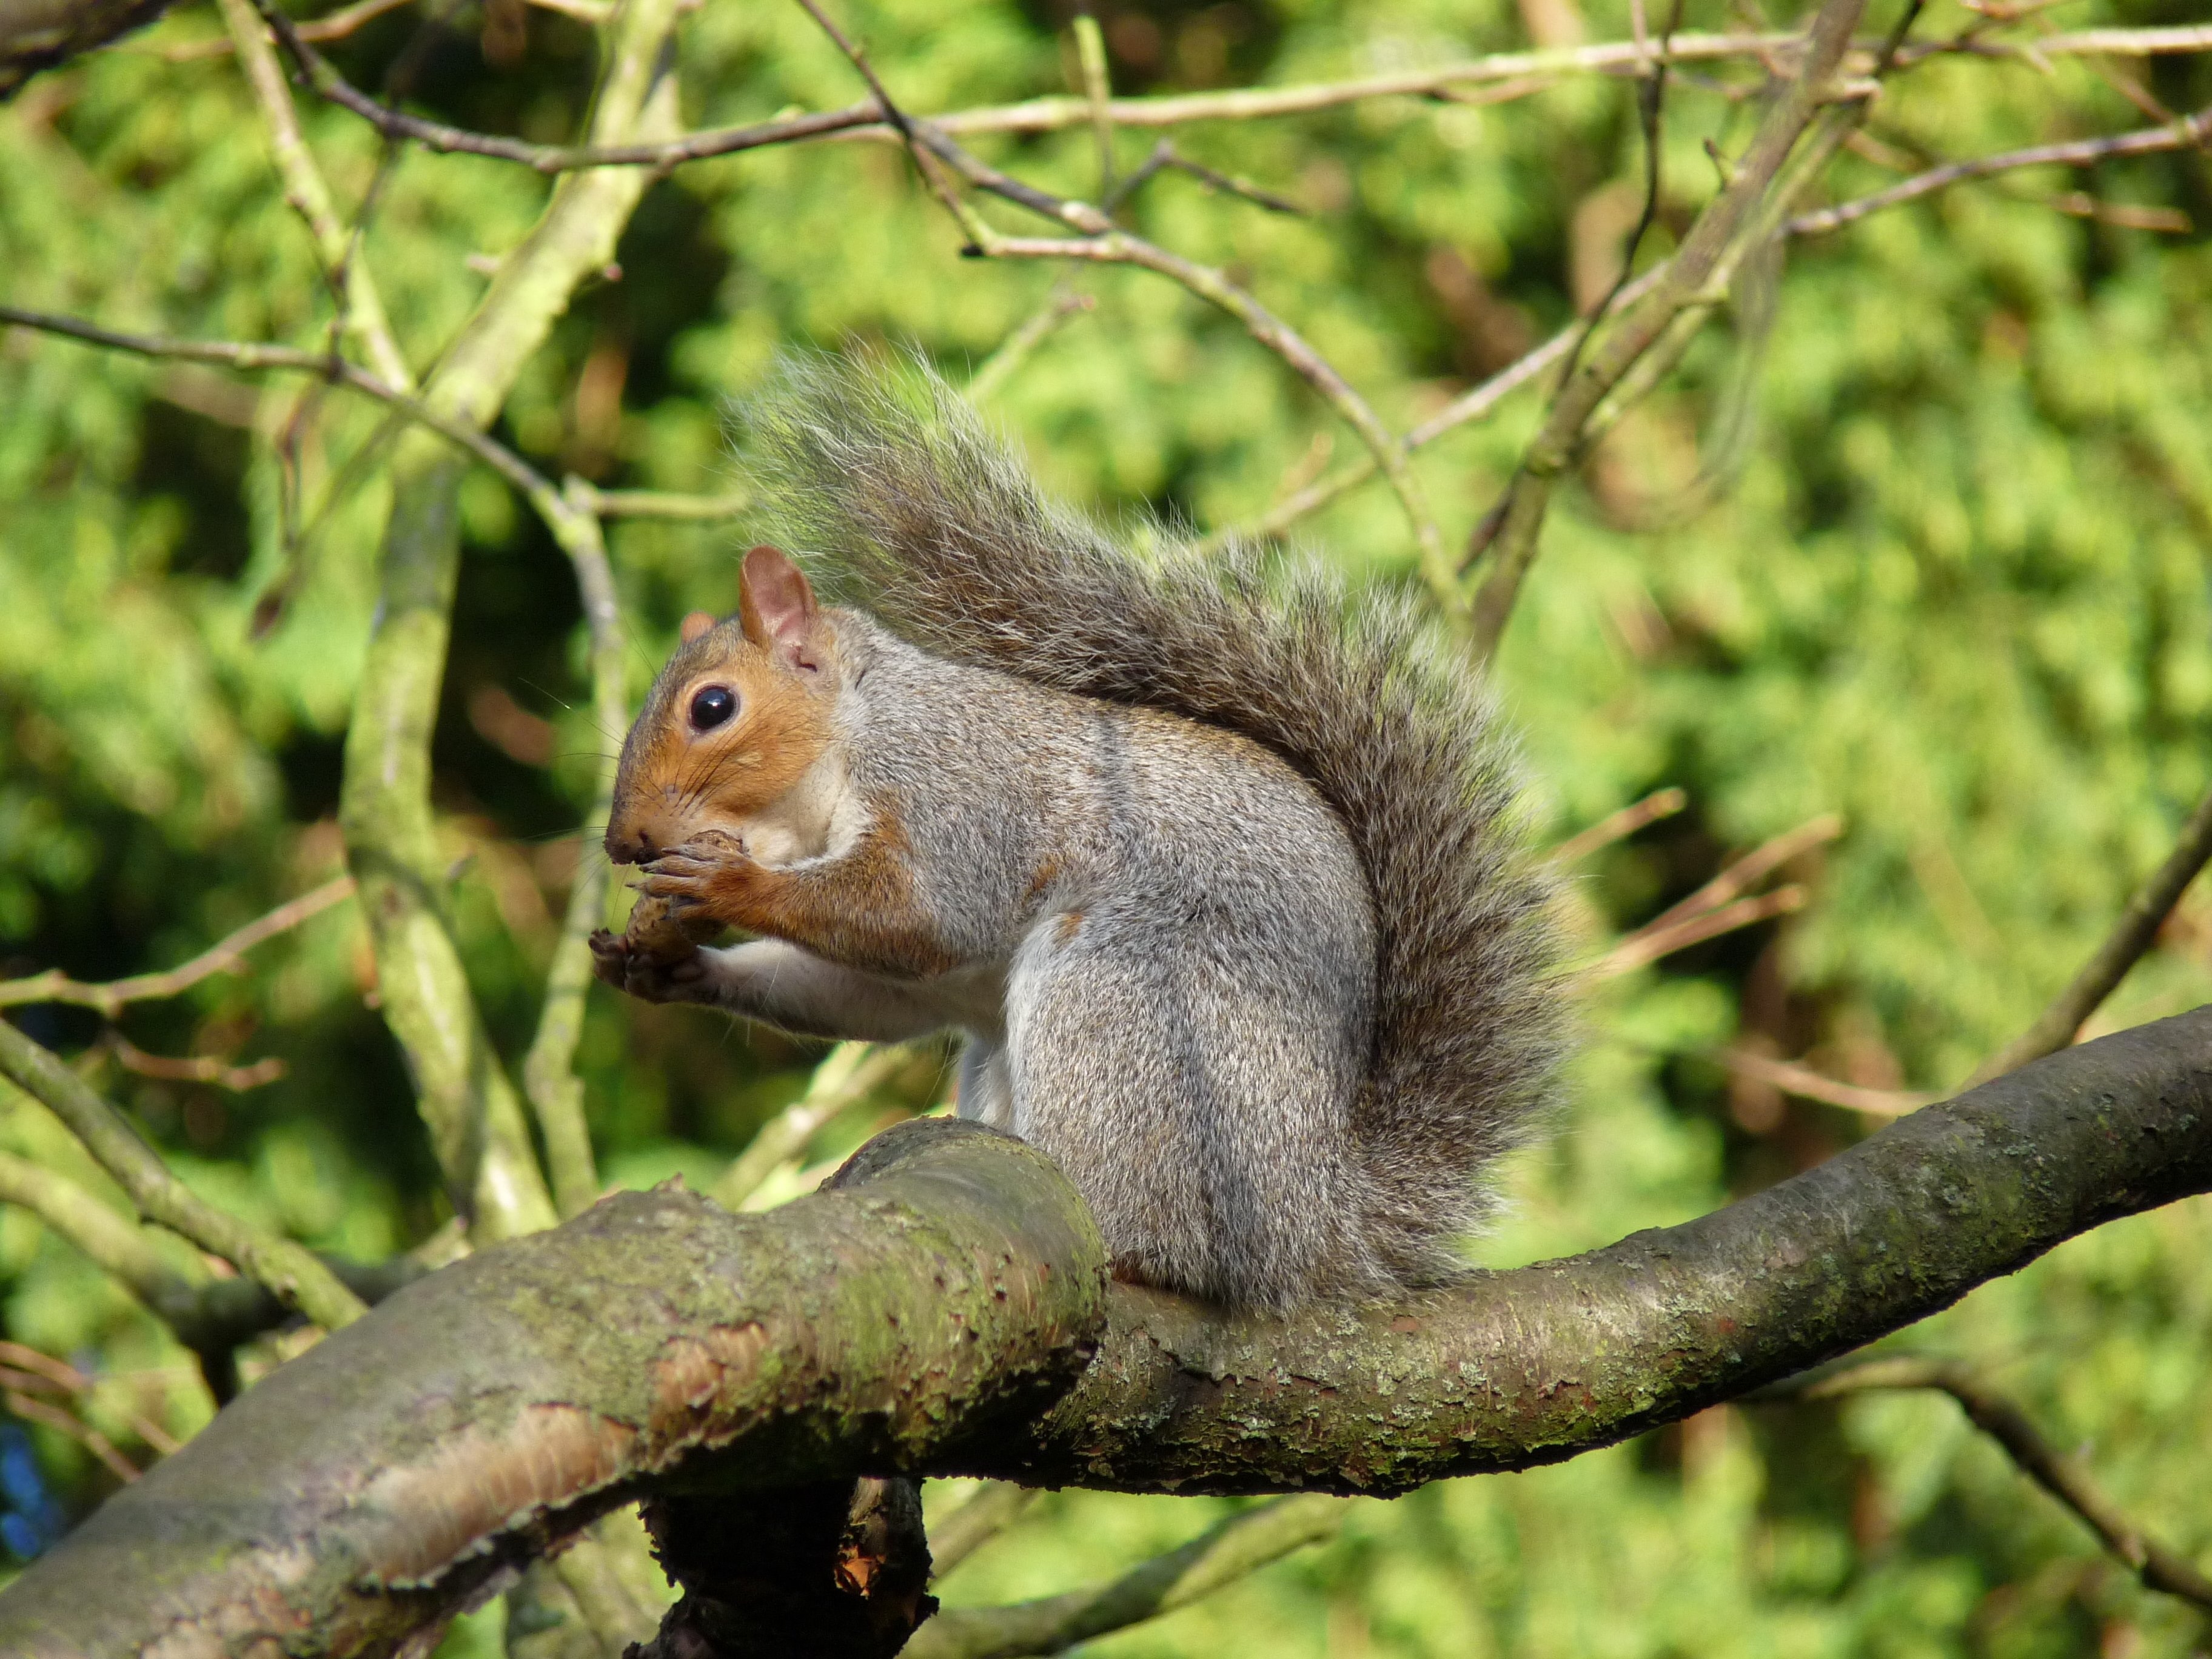 shallow focus photography of grey squirrel on tree brunch during daytime